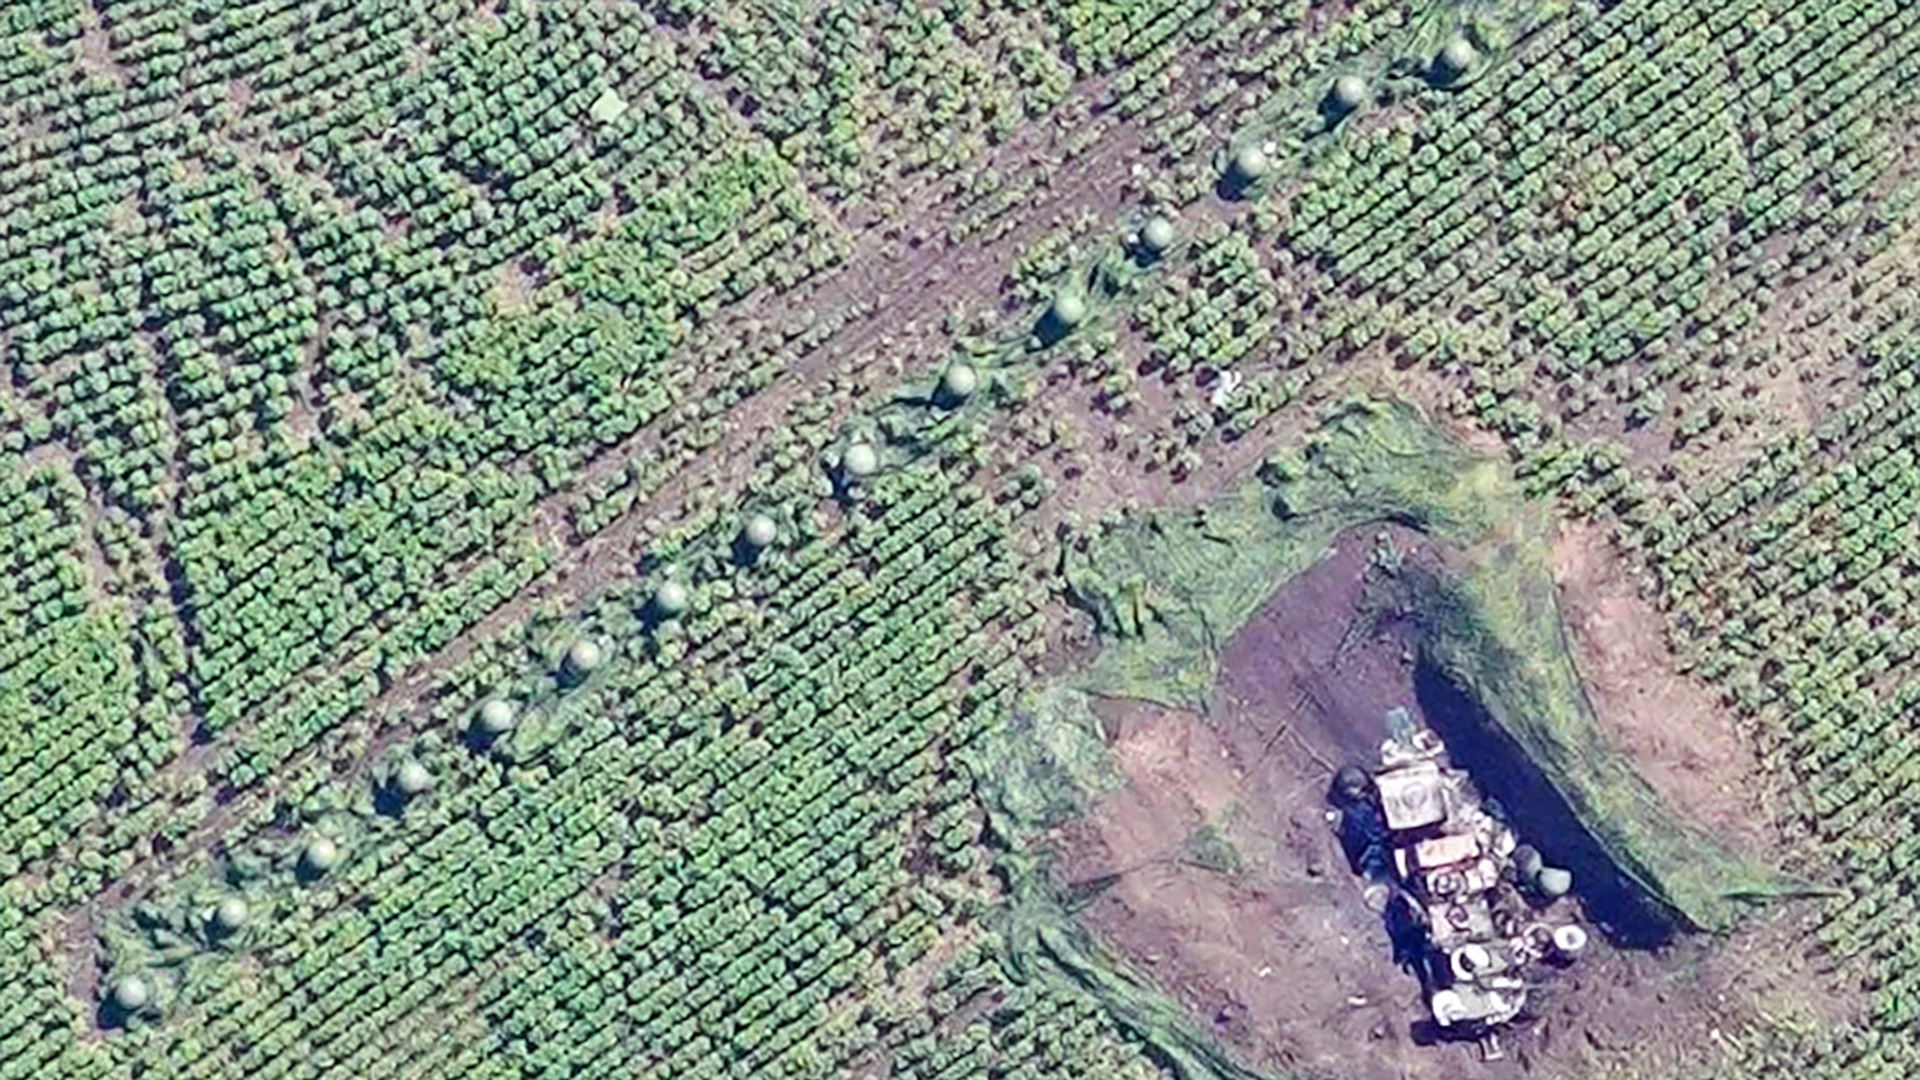 A mysterious array of what looks like 16 hemispherical structures has emerged in Ukraine without immediate explanation.